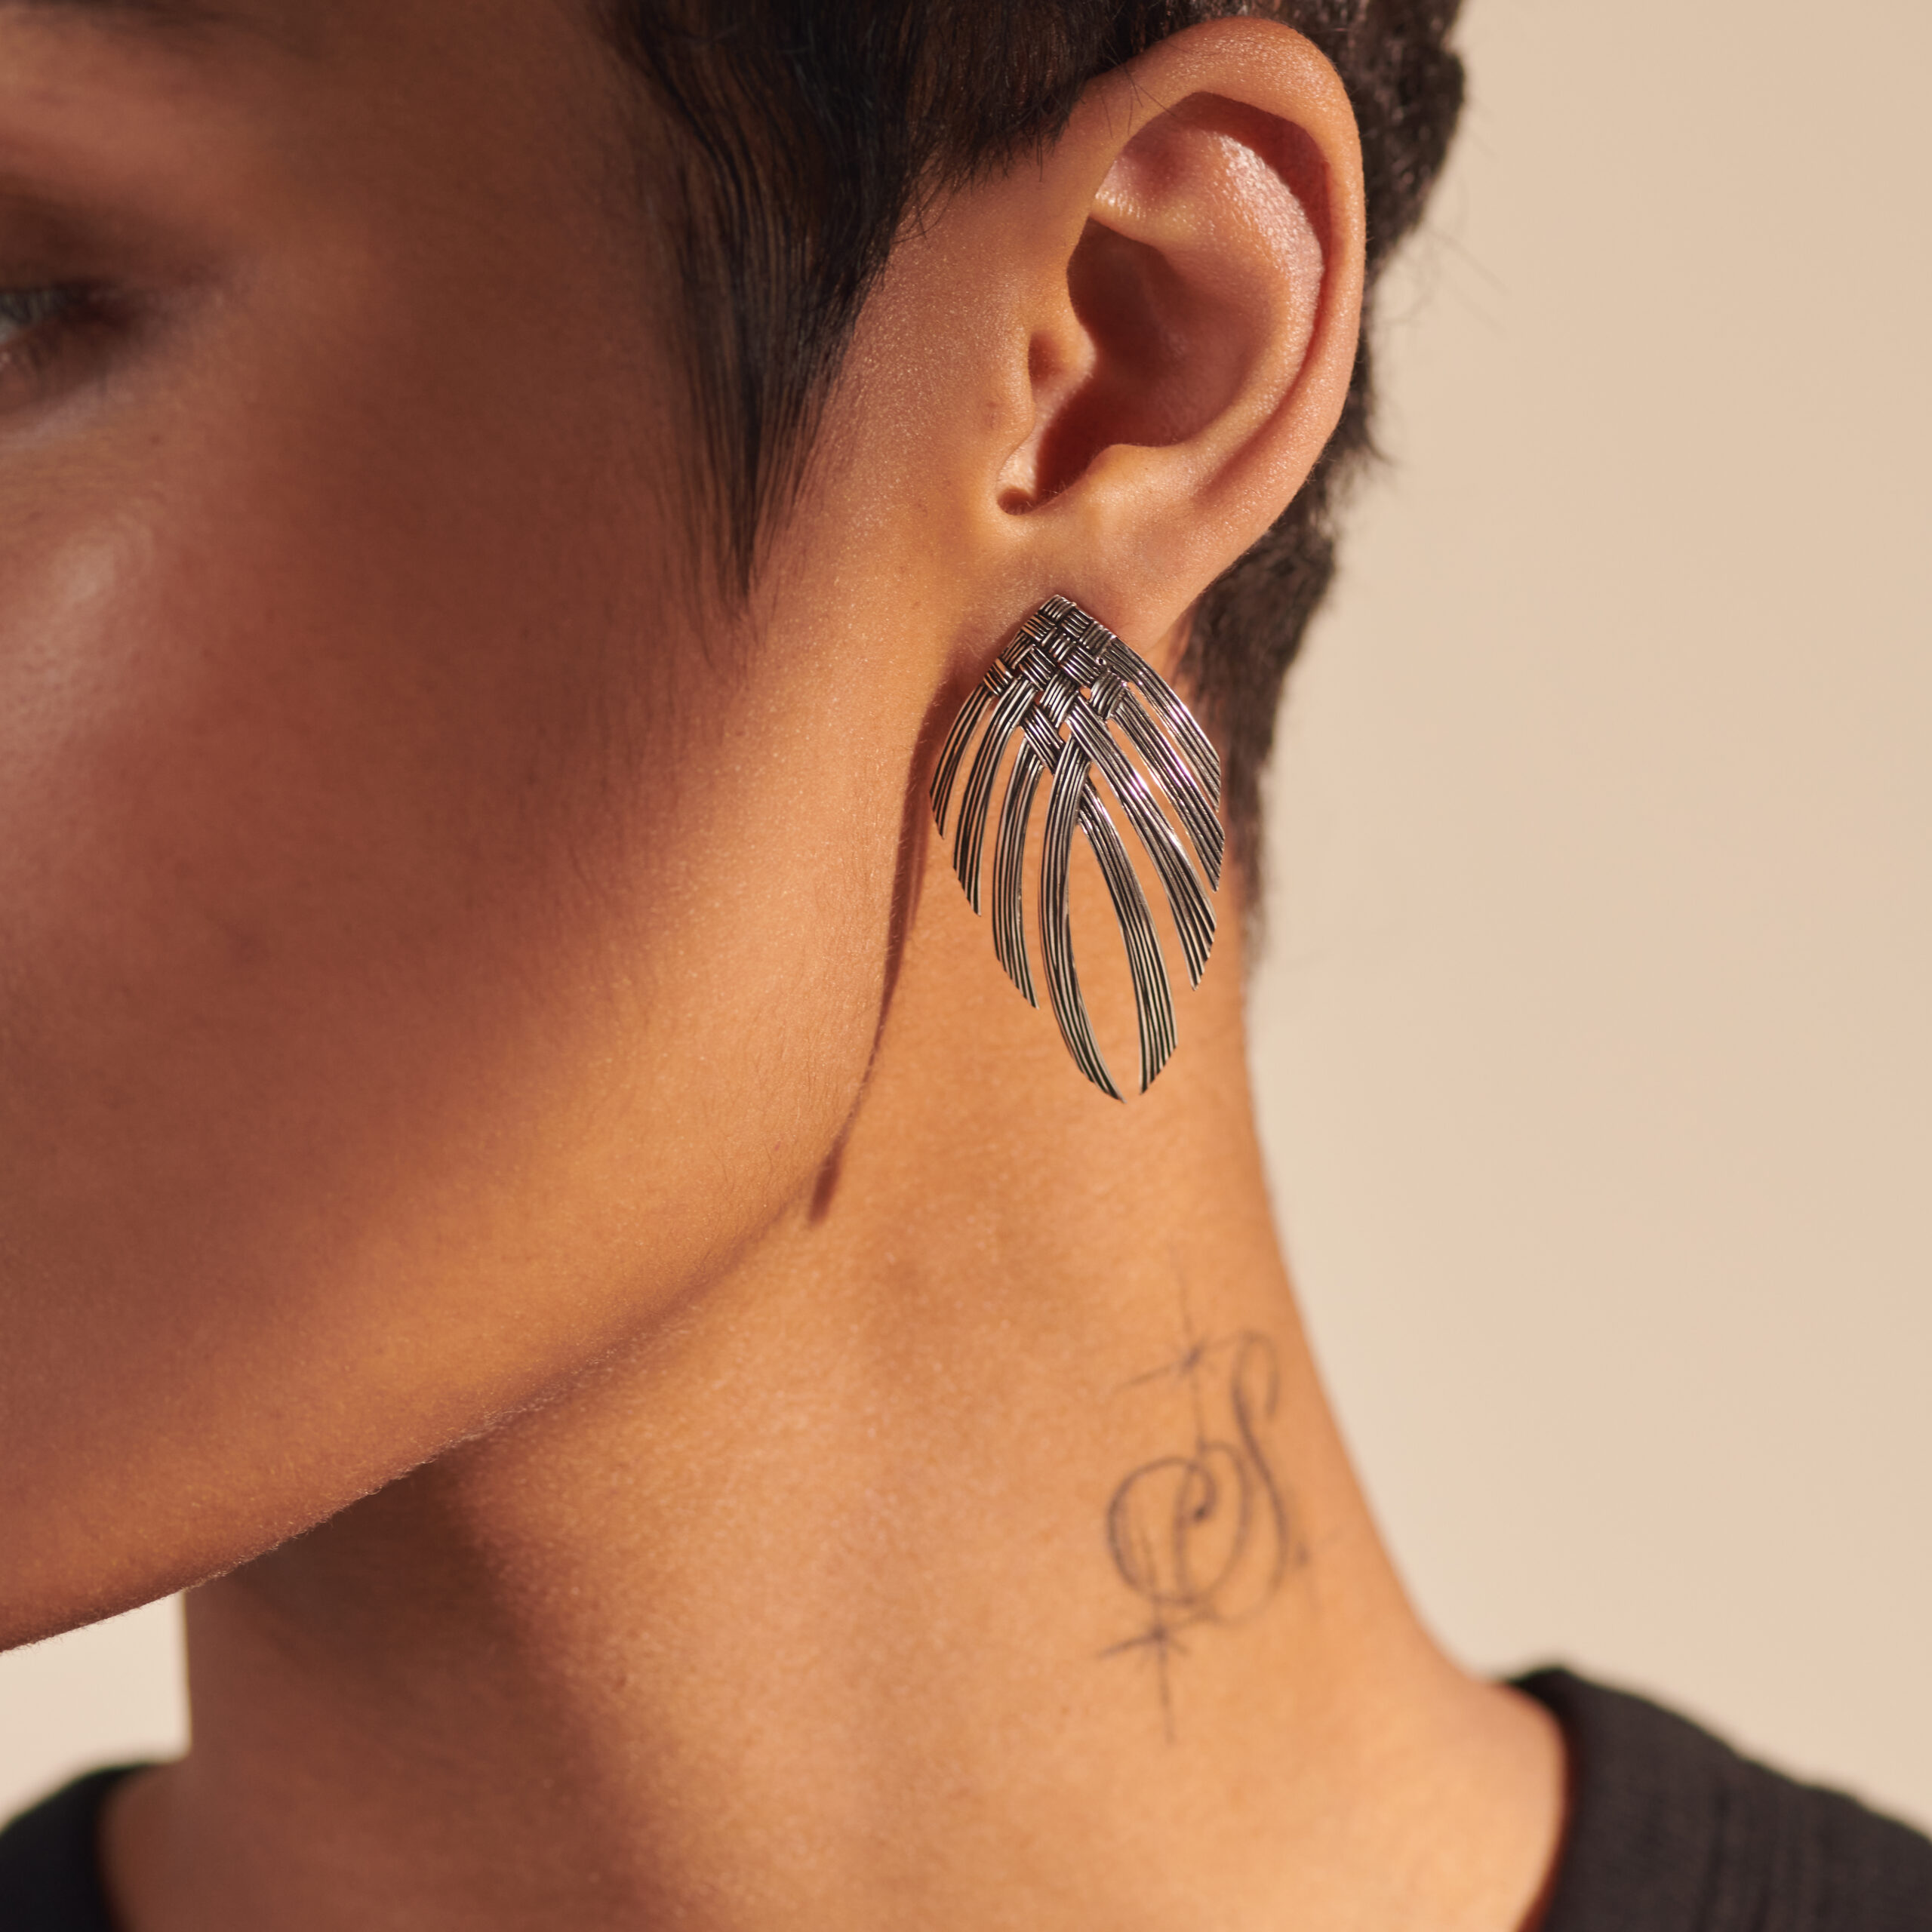 This pair of earrings by John Hardy is crafted from sterling silver and features a woven pattern.